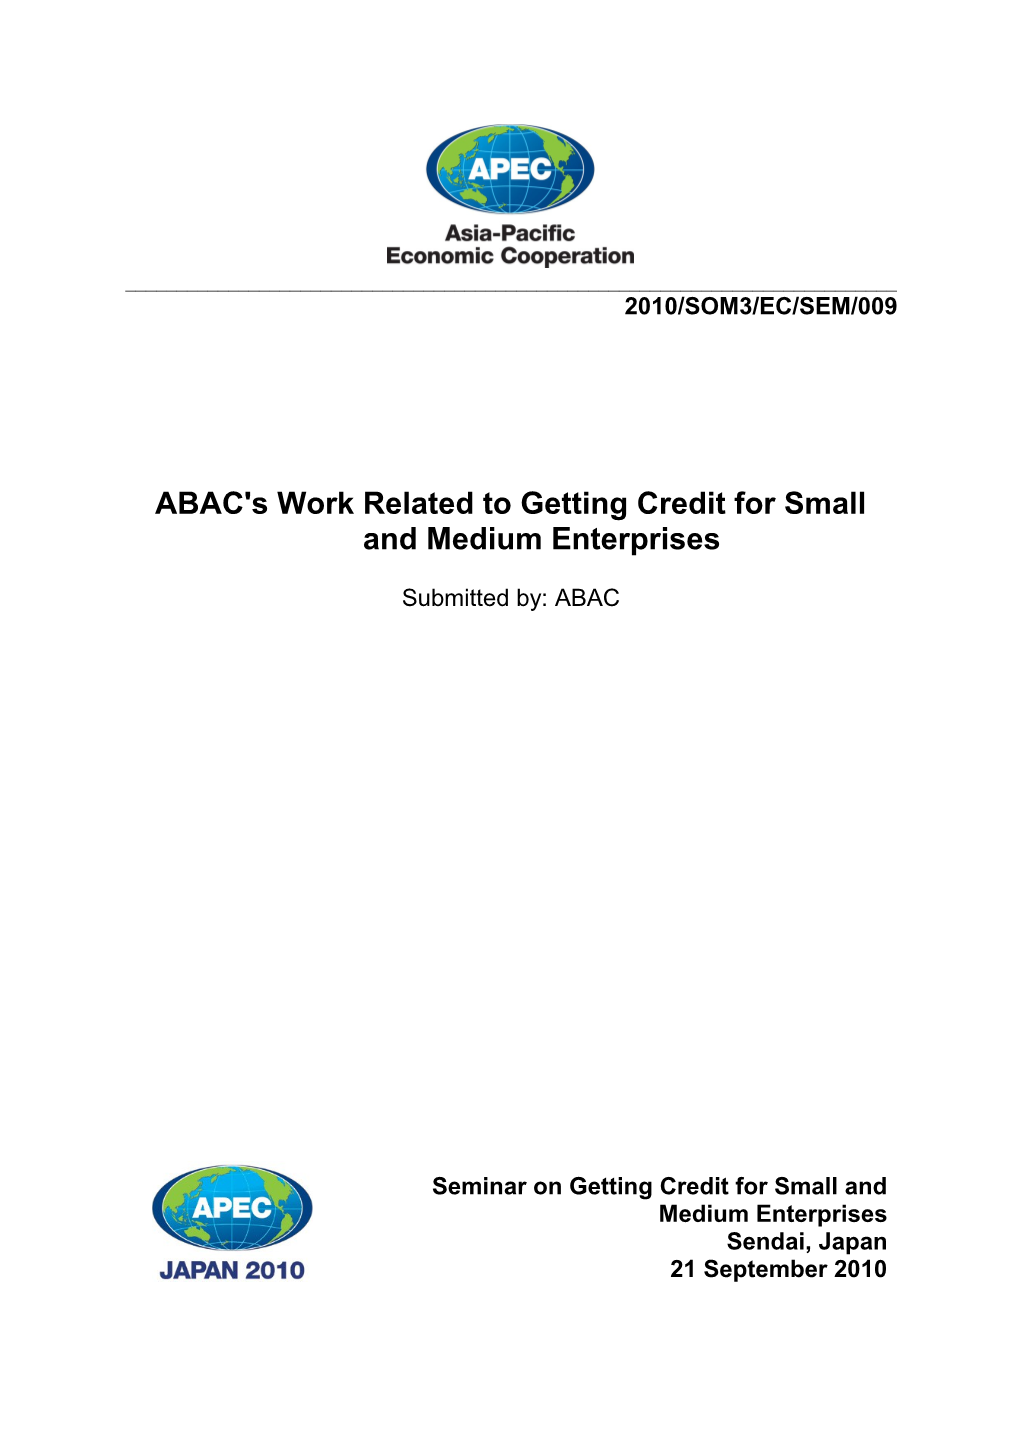 ABAC's Work Related to Getting Credit for Small and Medium Enterprises